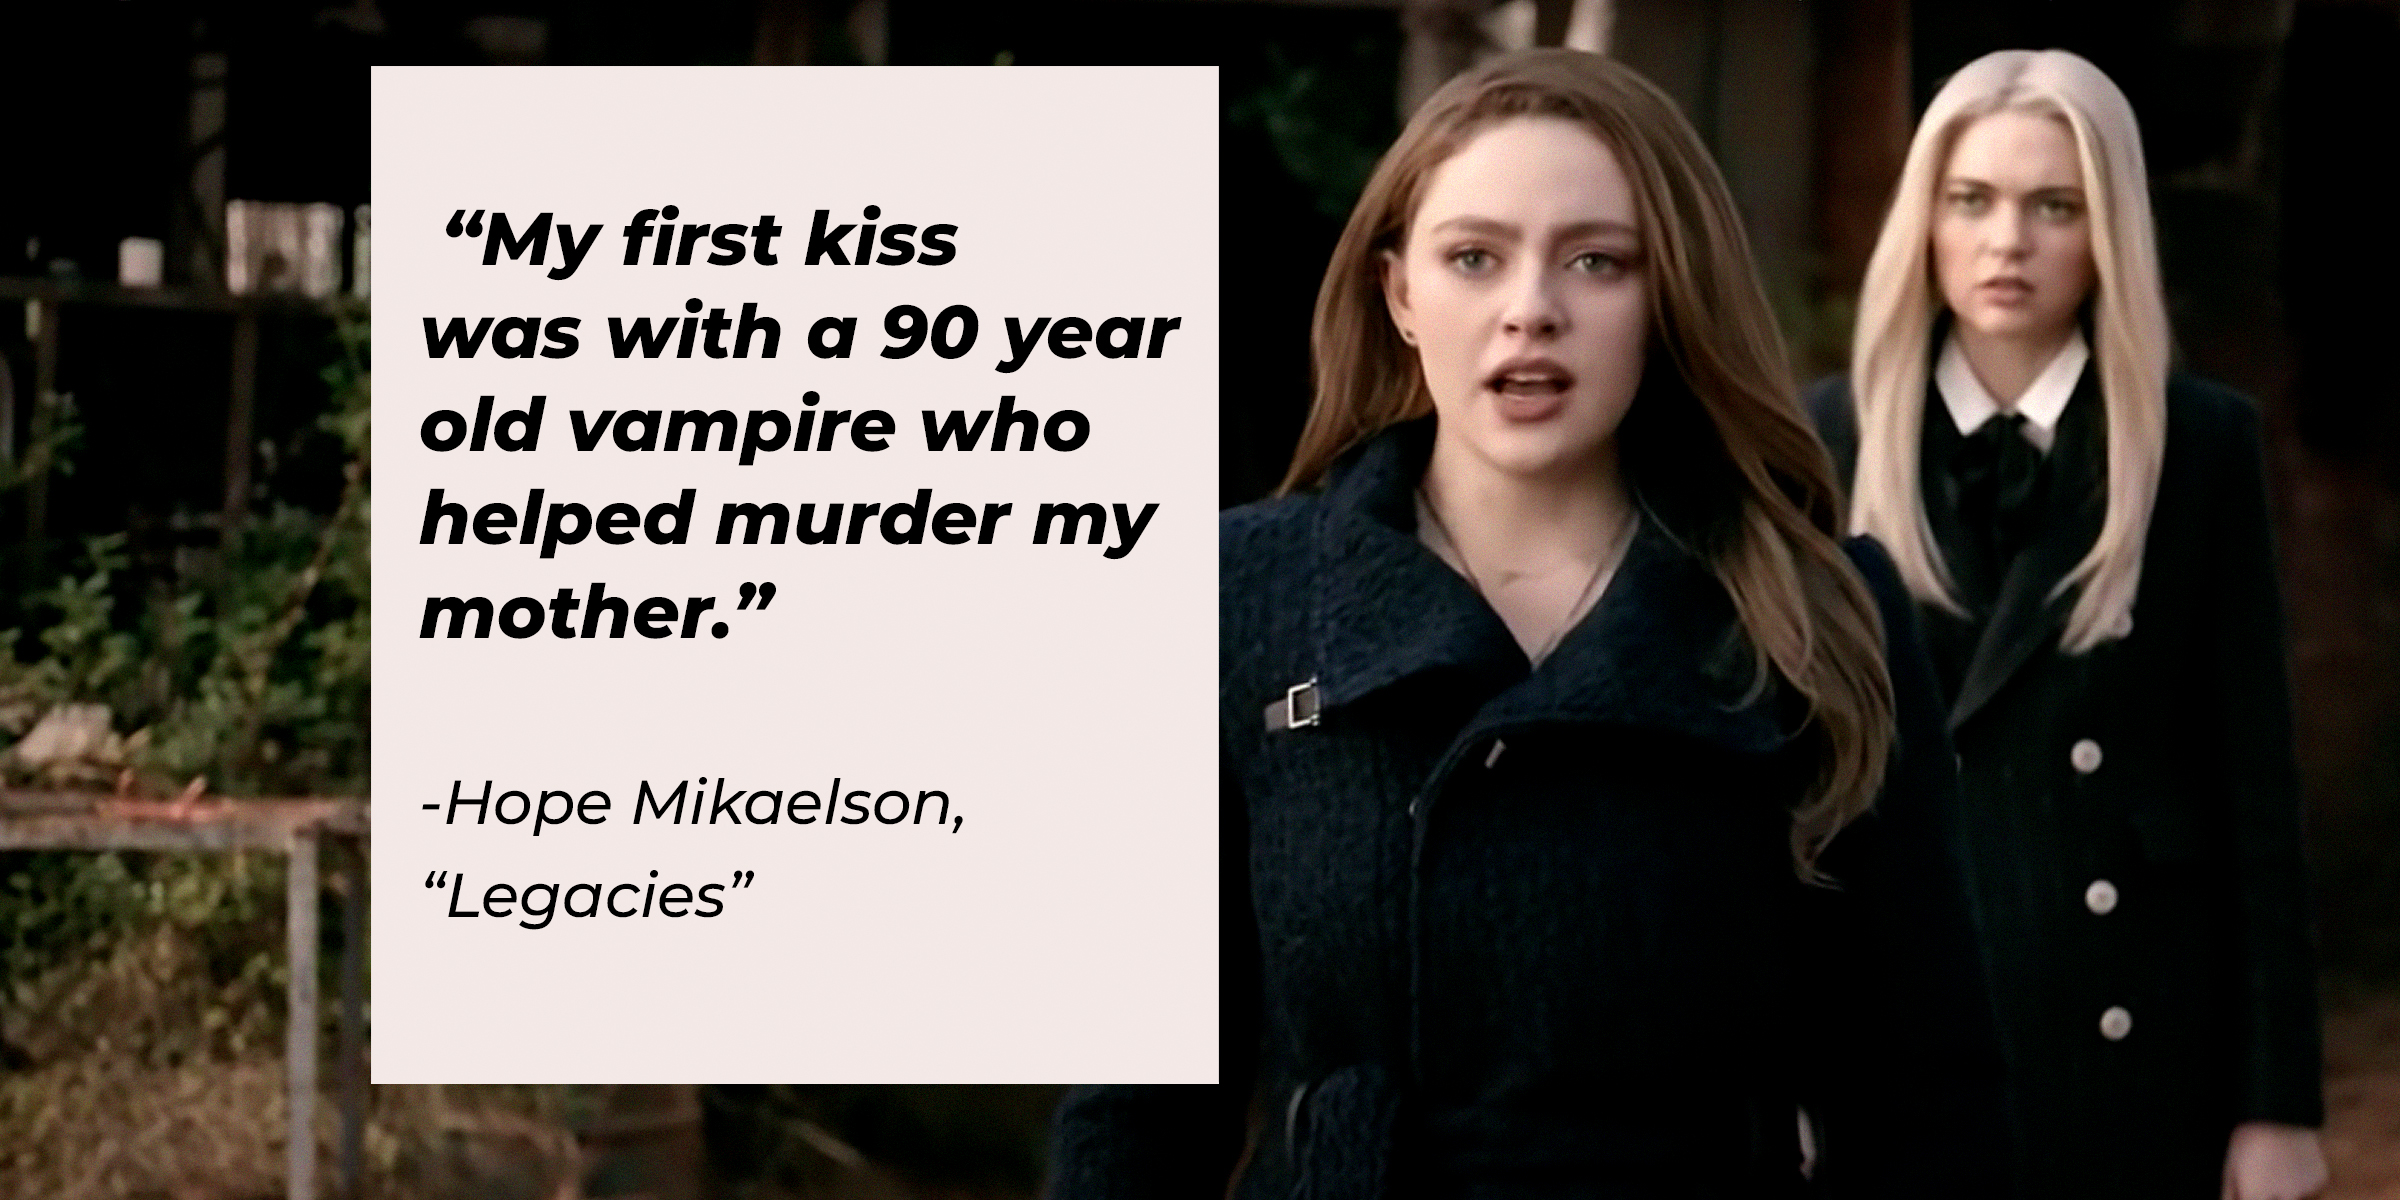 Hope Mikaelson with her quote: "My first kiss was with a 90 year old vampire who helped murder my mother.” | Source: Facebook.com/CWLegacies